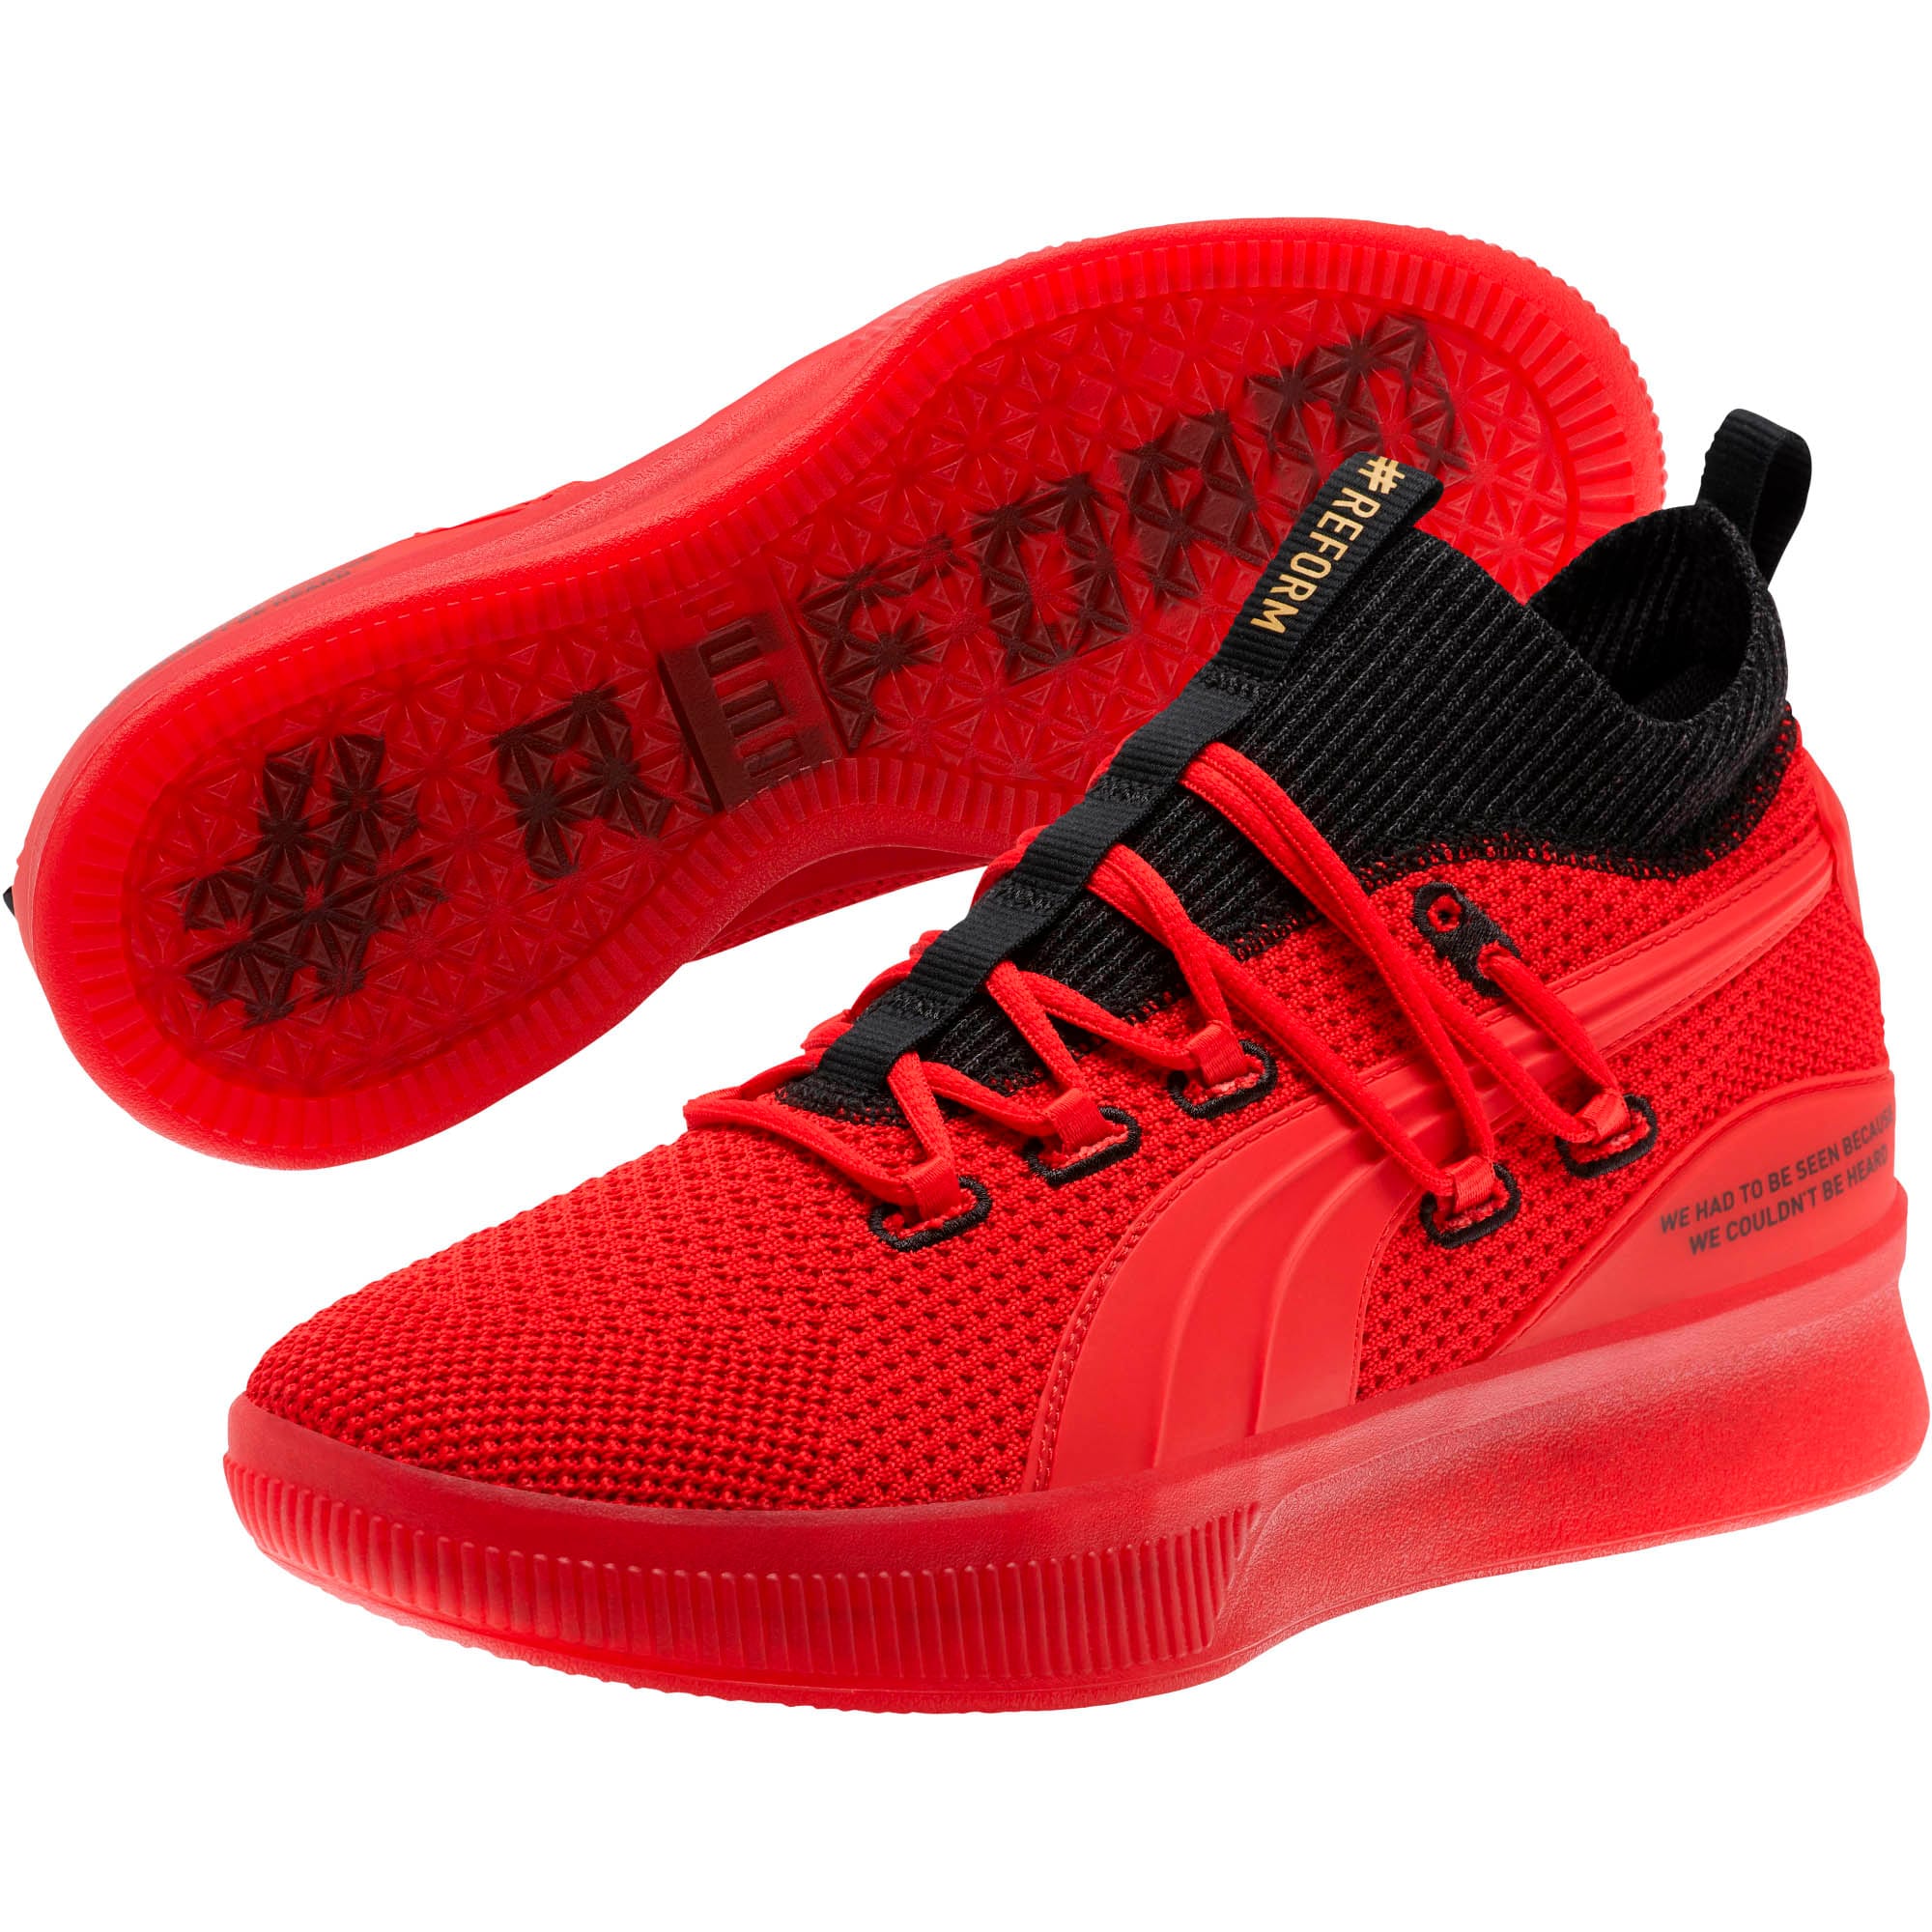 Clyde Court #REFORM Basketball Shoes 